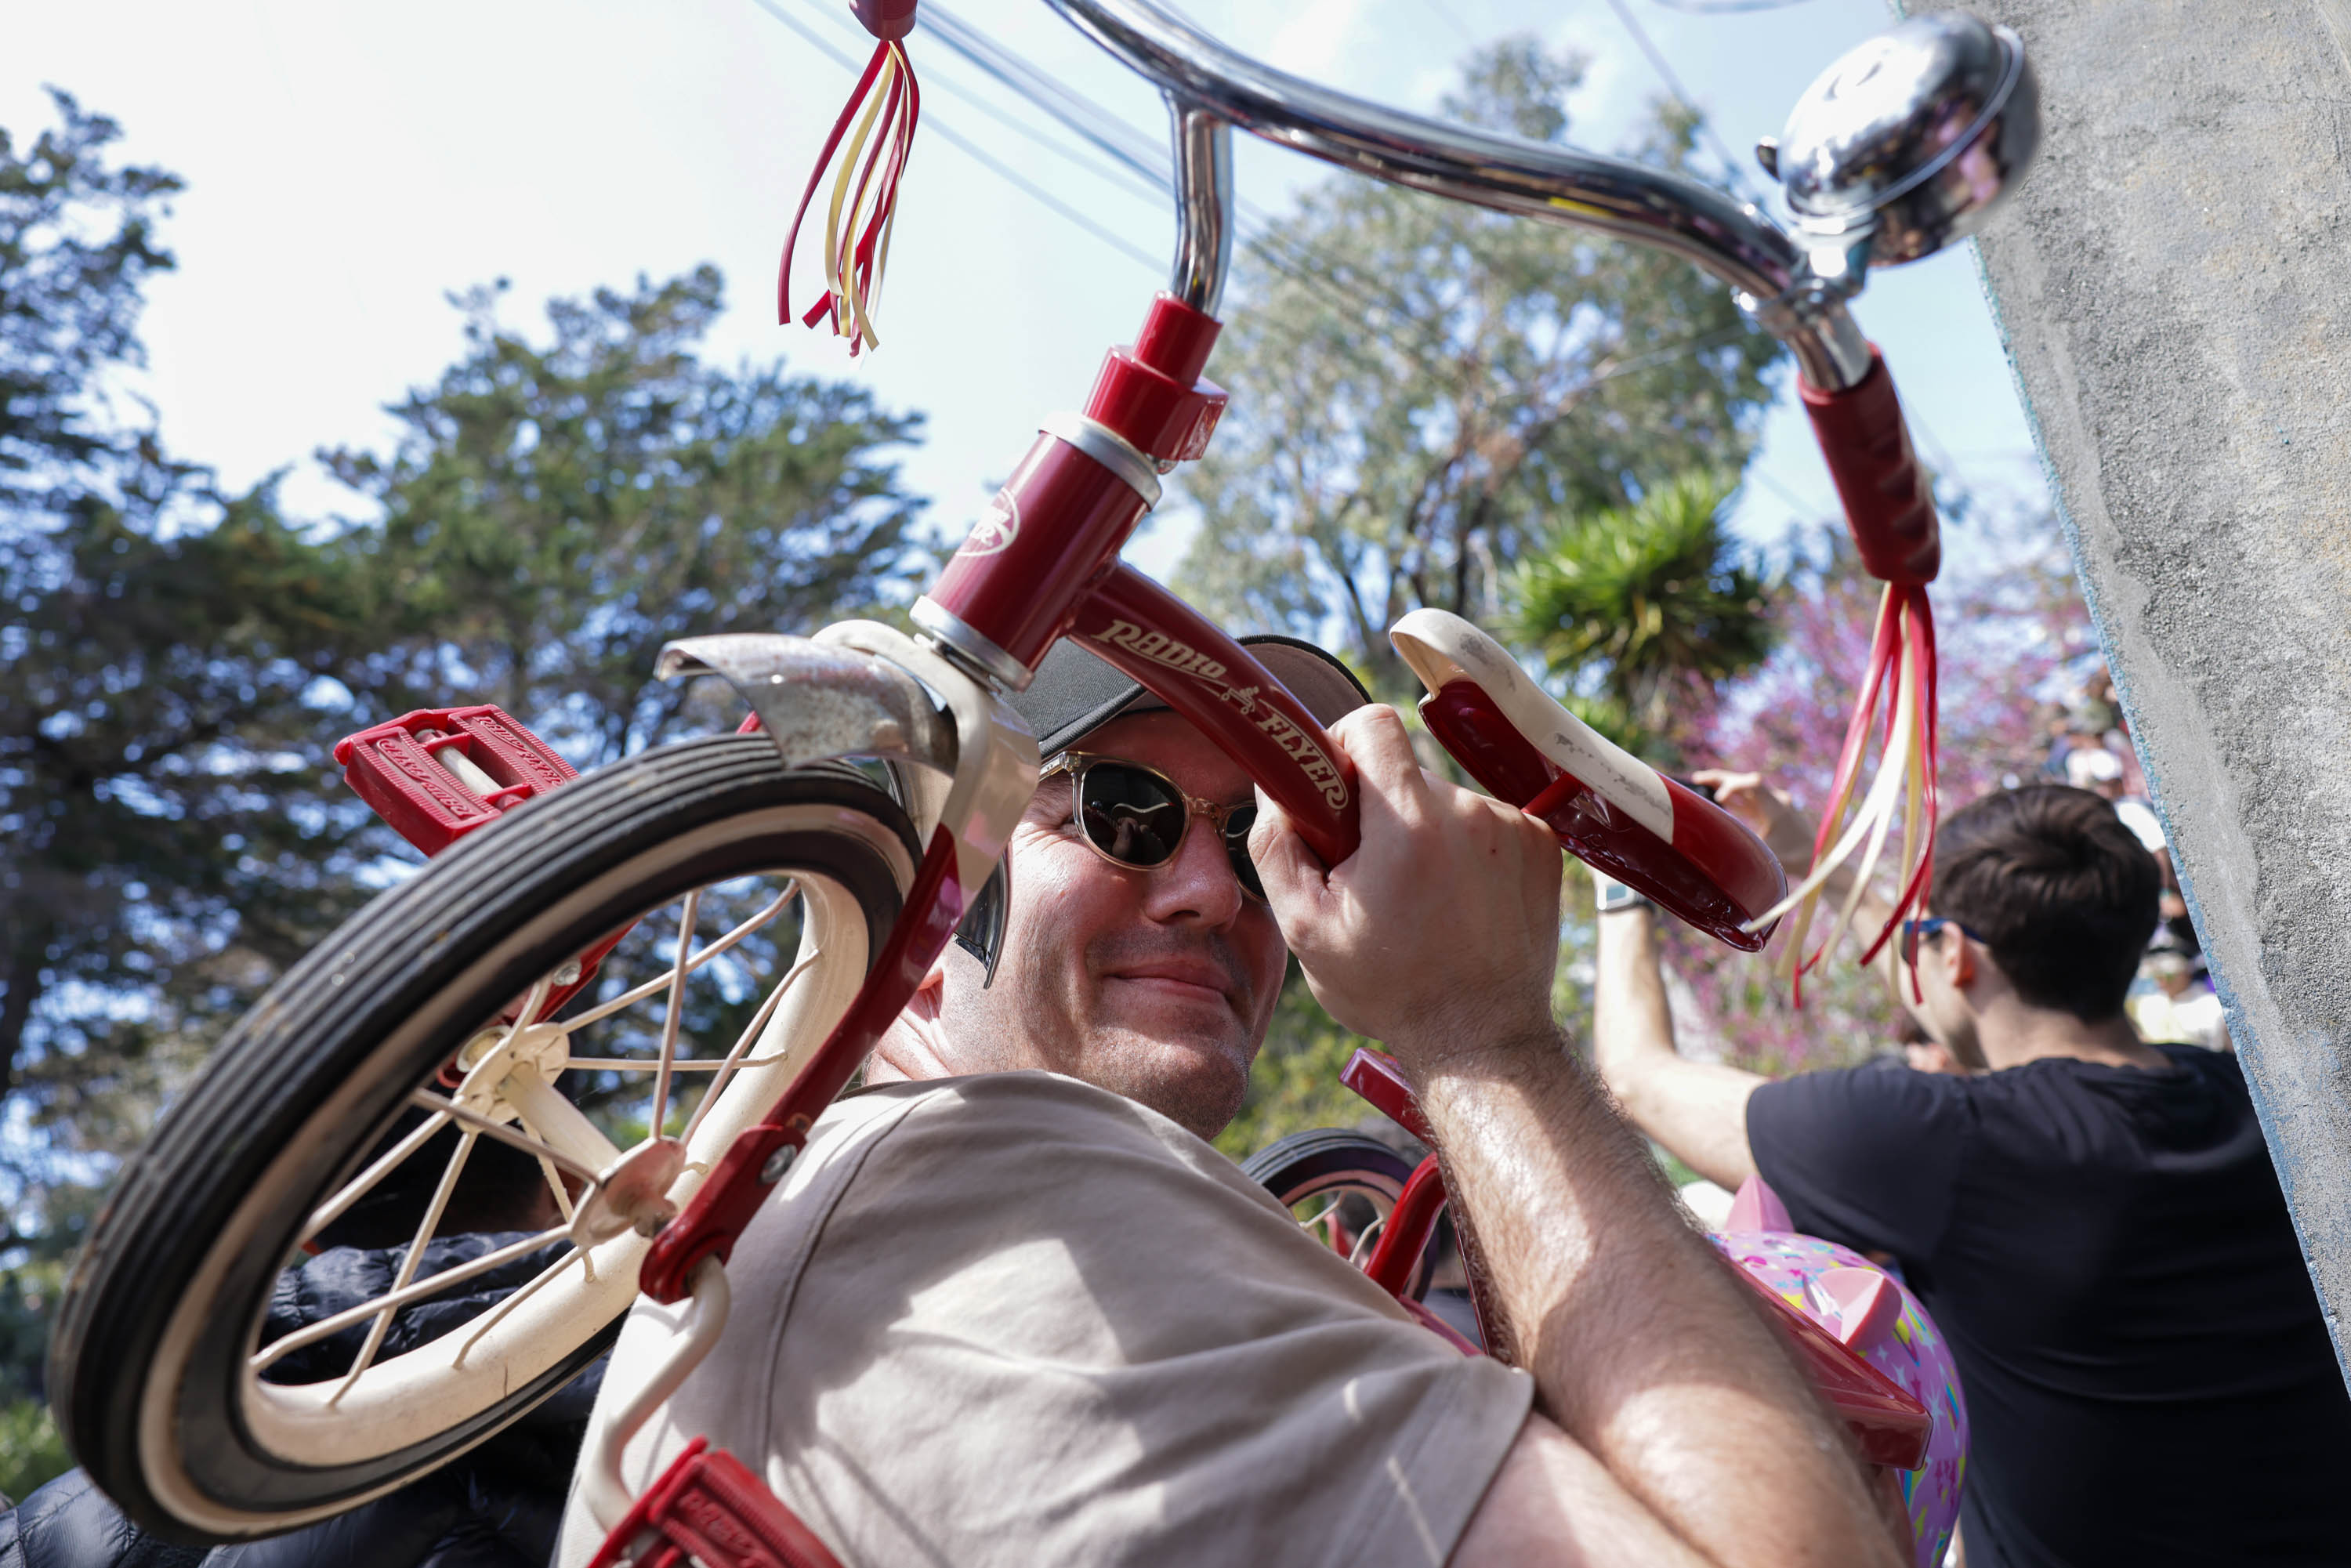 A man peers through the frame of an upside-down red tricycle, its wheel and handlebars prominent.